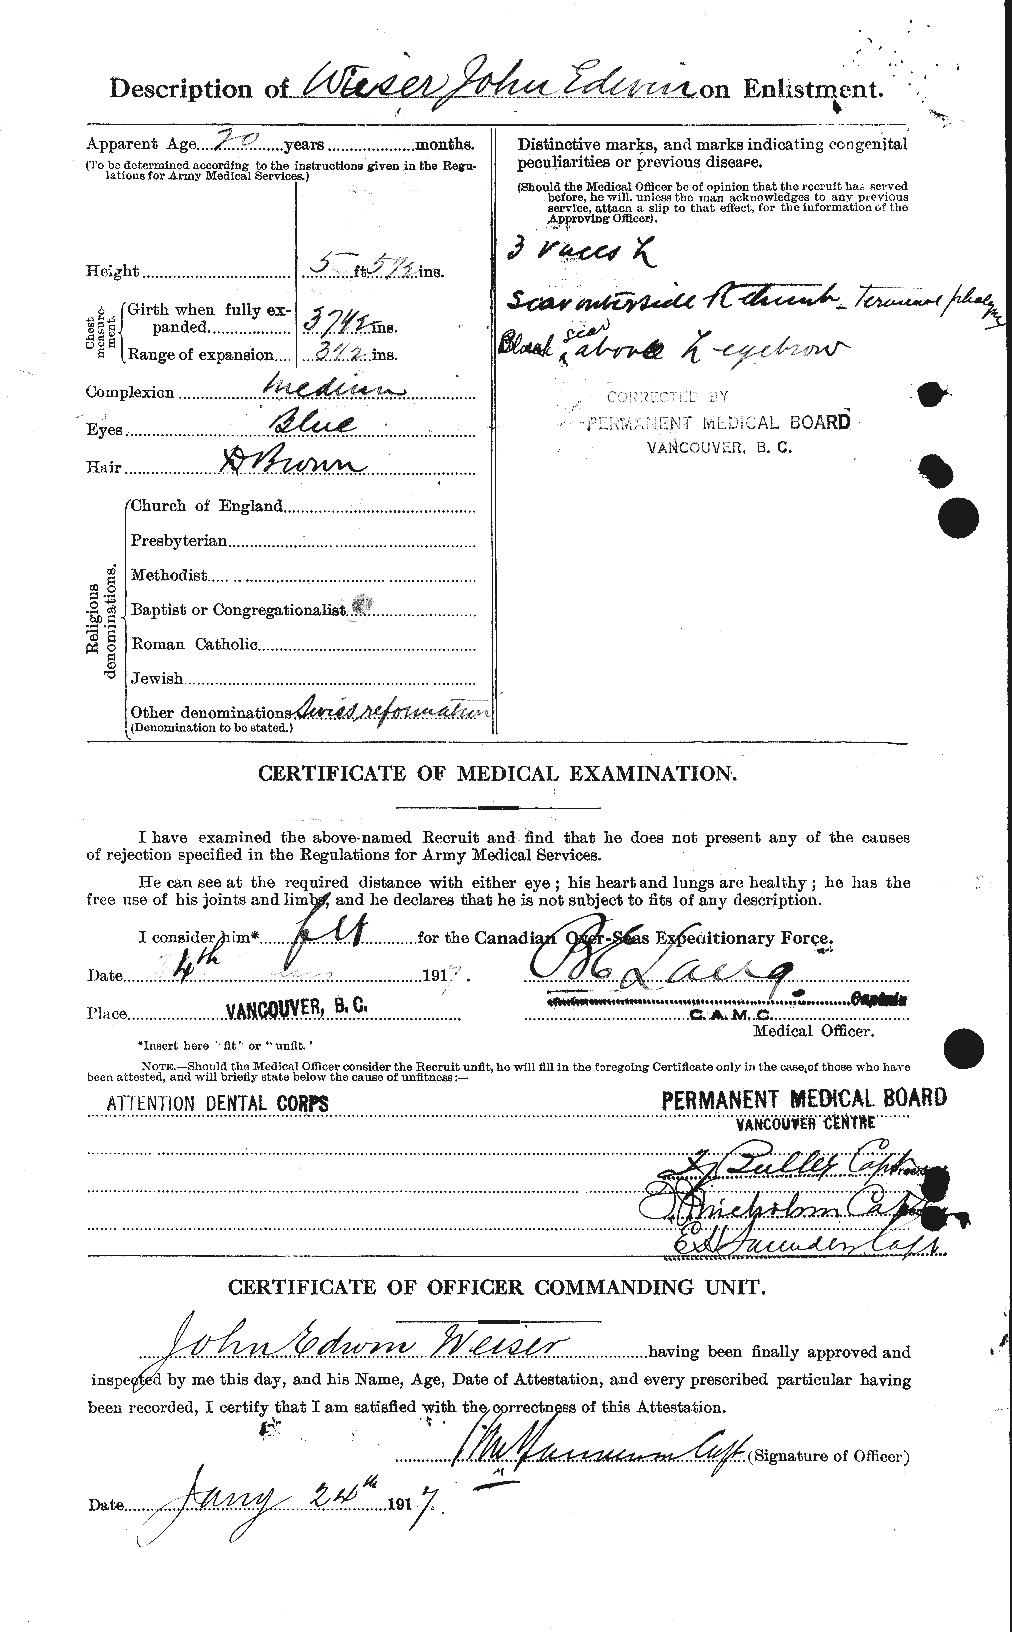 Personnel Records of the First World War - CEF 674179b